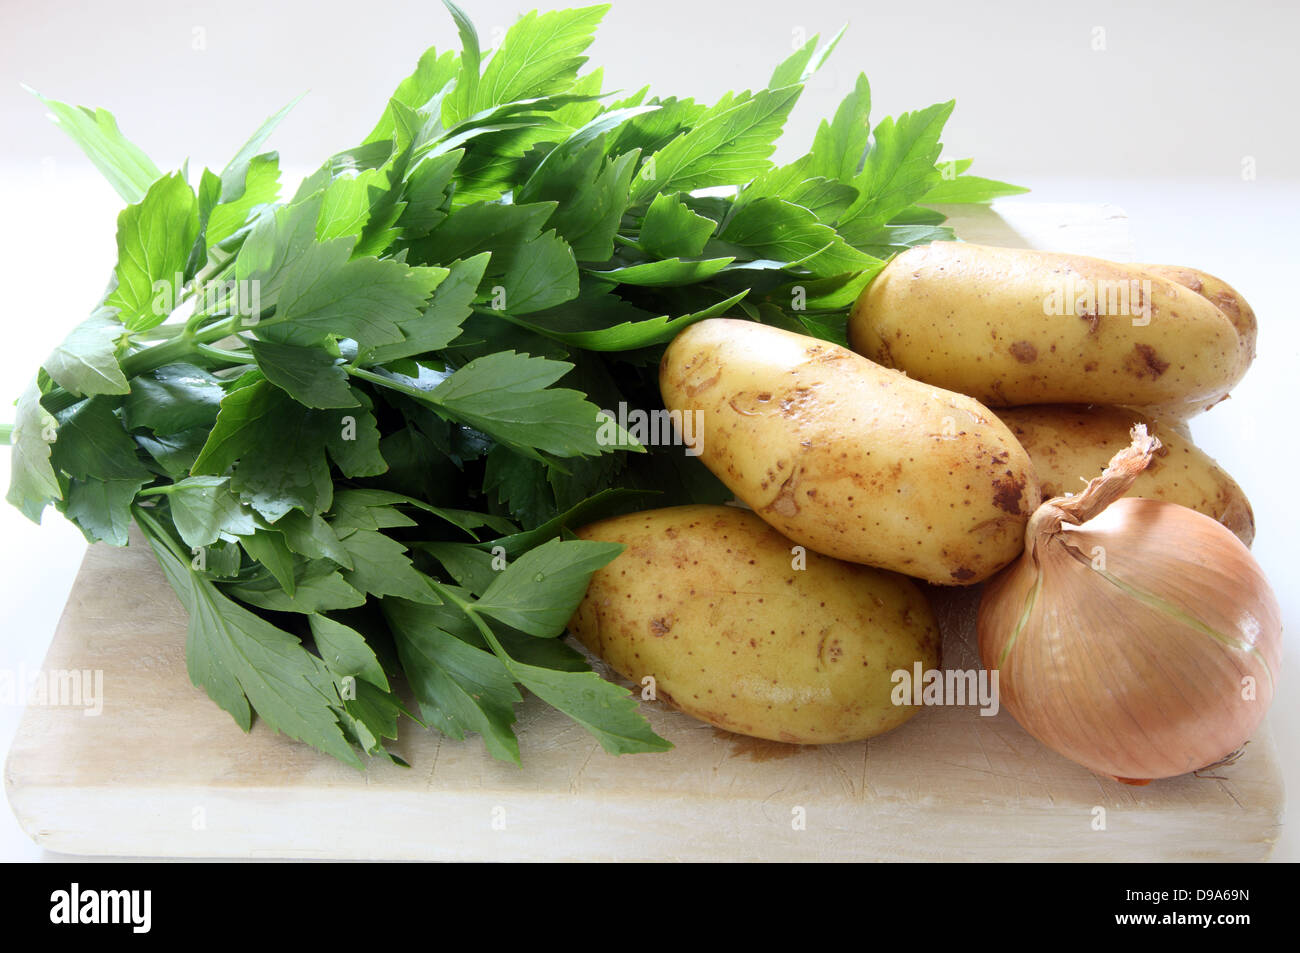 The raw ingredients for Lovage soup, lovage, potatoes, onion Stock Photo